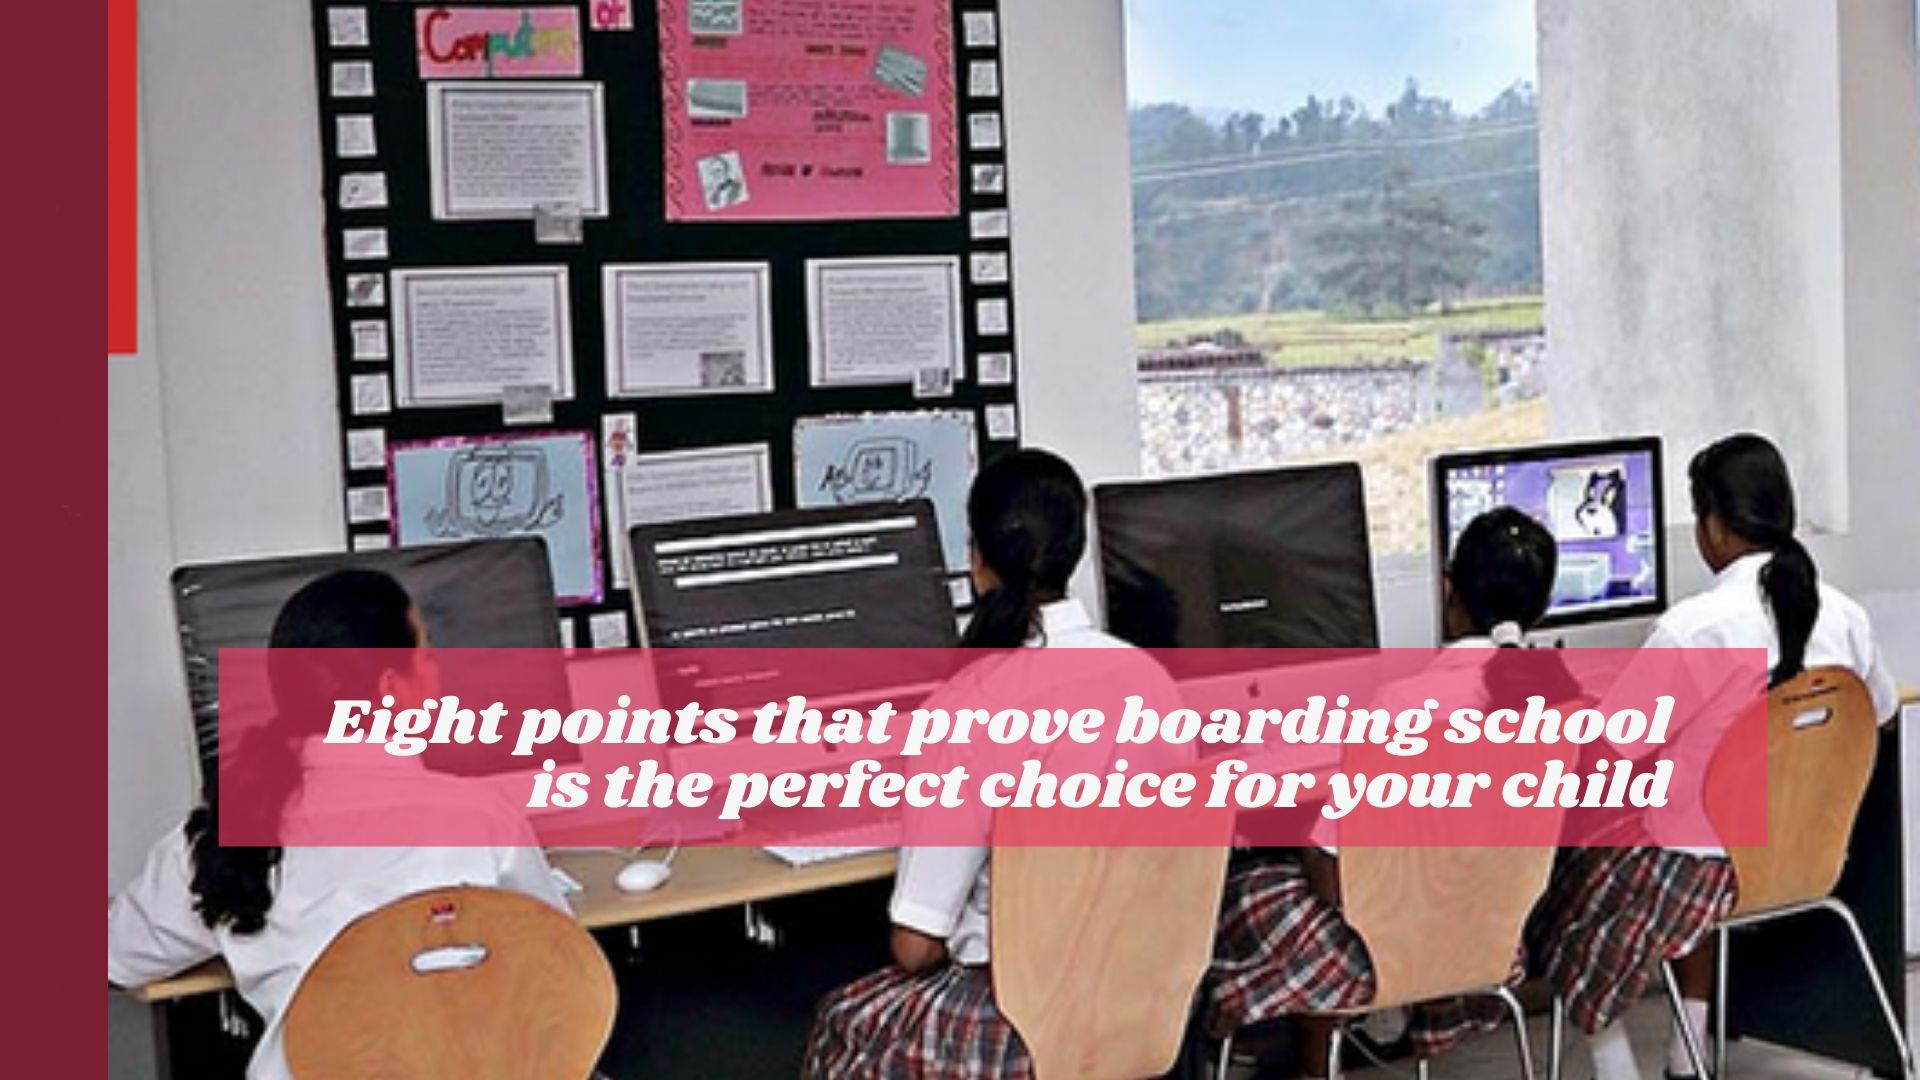 Eight points that prove boarding school is the perfect choice for your child